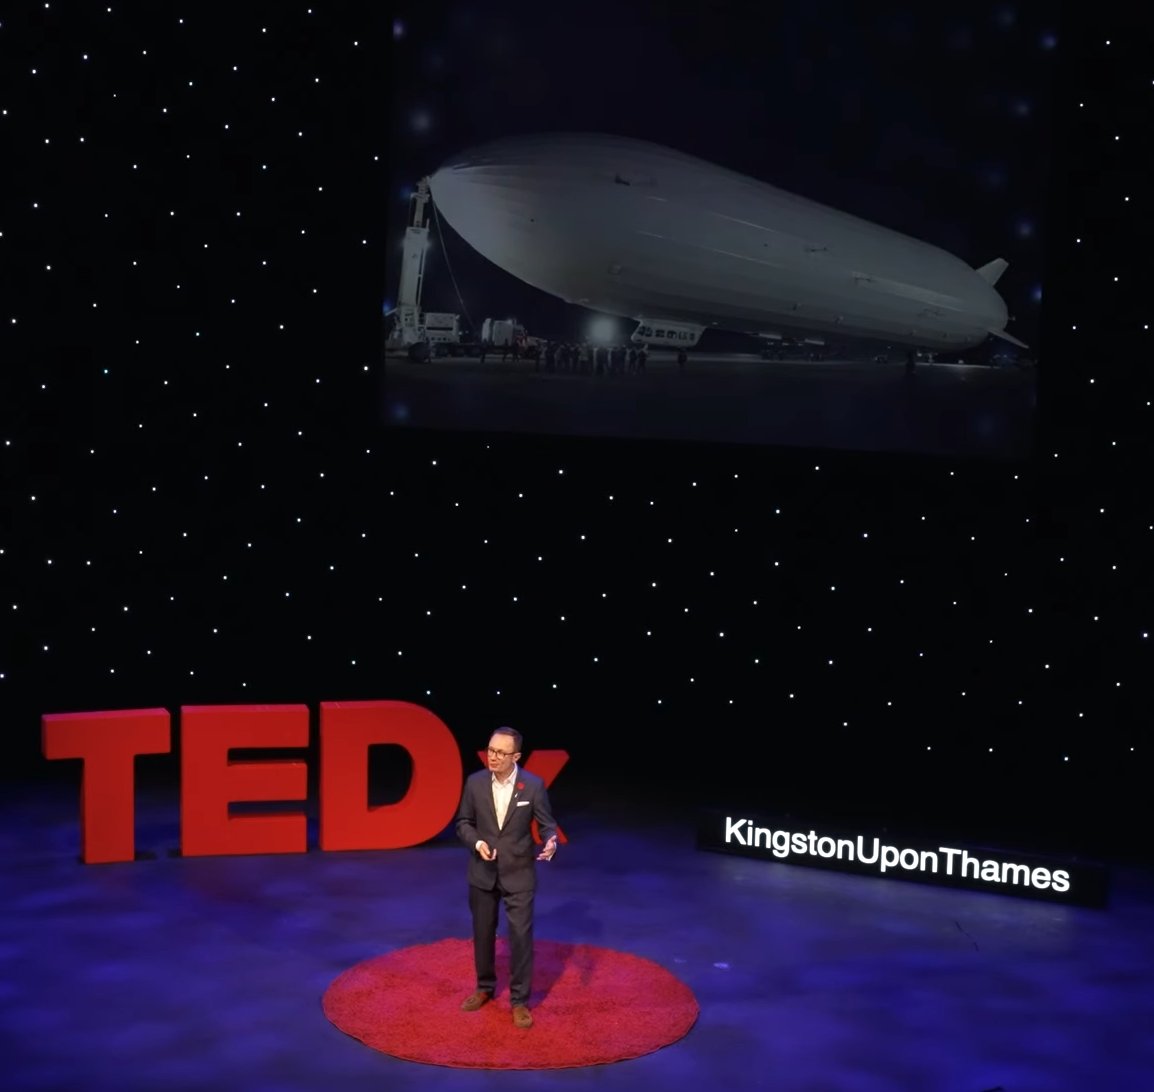 Could airships make a comeback?

@NickRogersLDN, creator of @upshippod, thinks so!

Watch his @TEDxKingston talk on the topic here:
youtube.com/watch?v=AaKsb9…

Listen to 'Up Ship! The Airship History Podcast' here:
linktr.ee/upshippod

#AirshipAssociation #AAIC2024 #LTANews